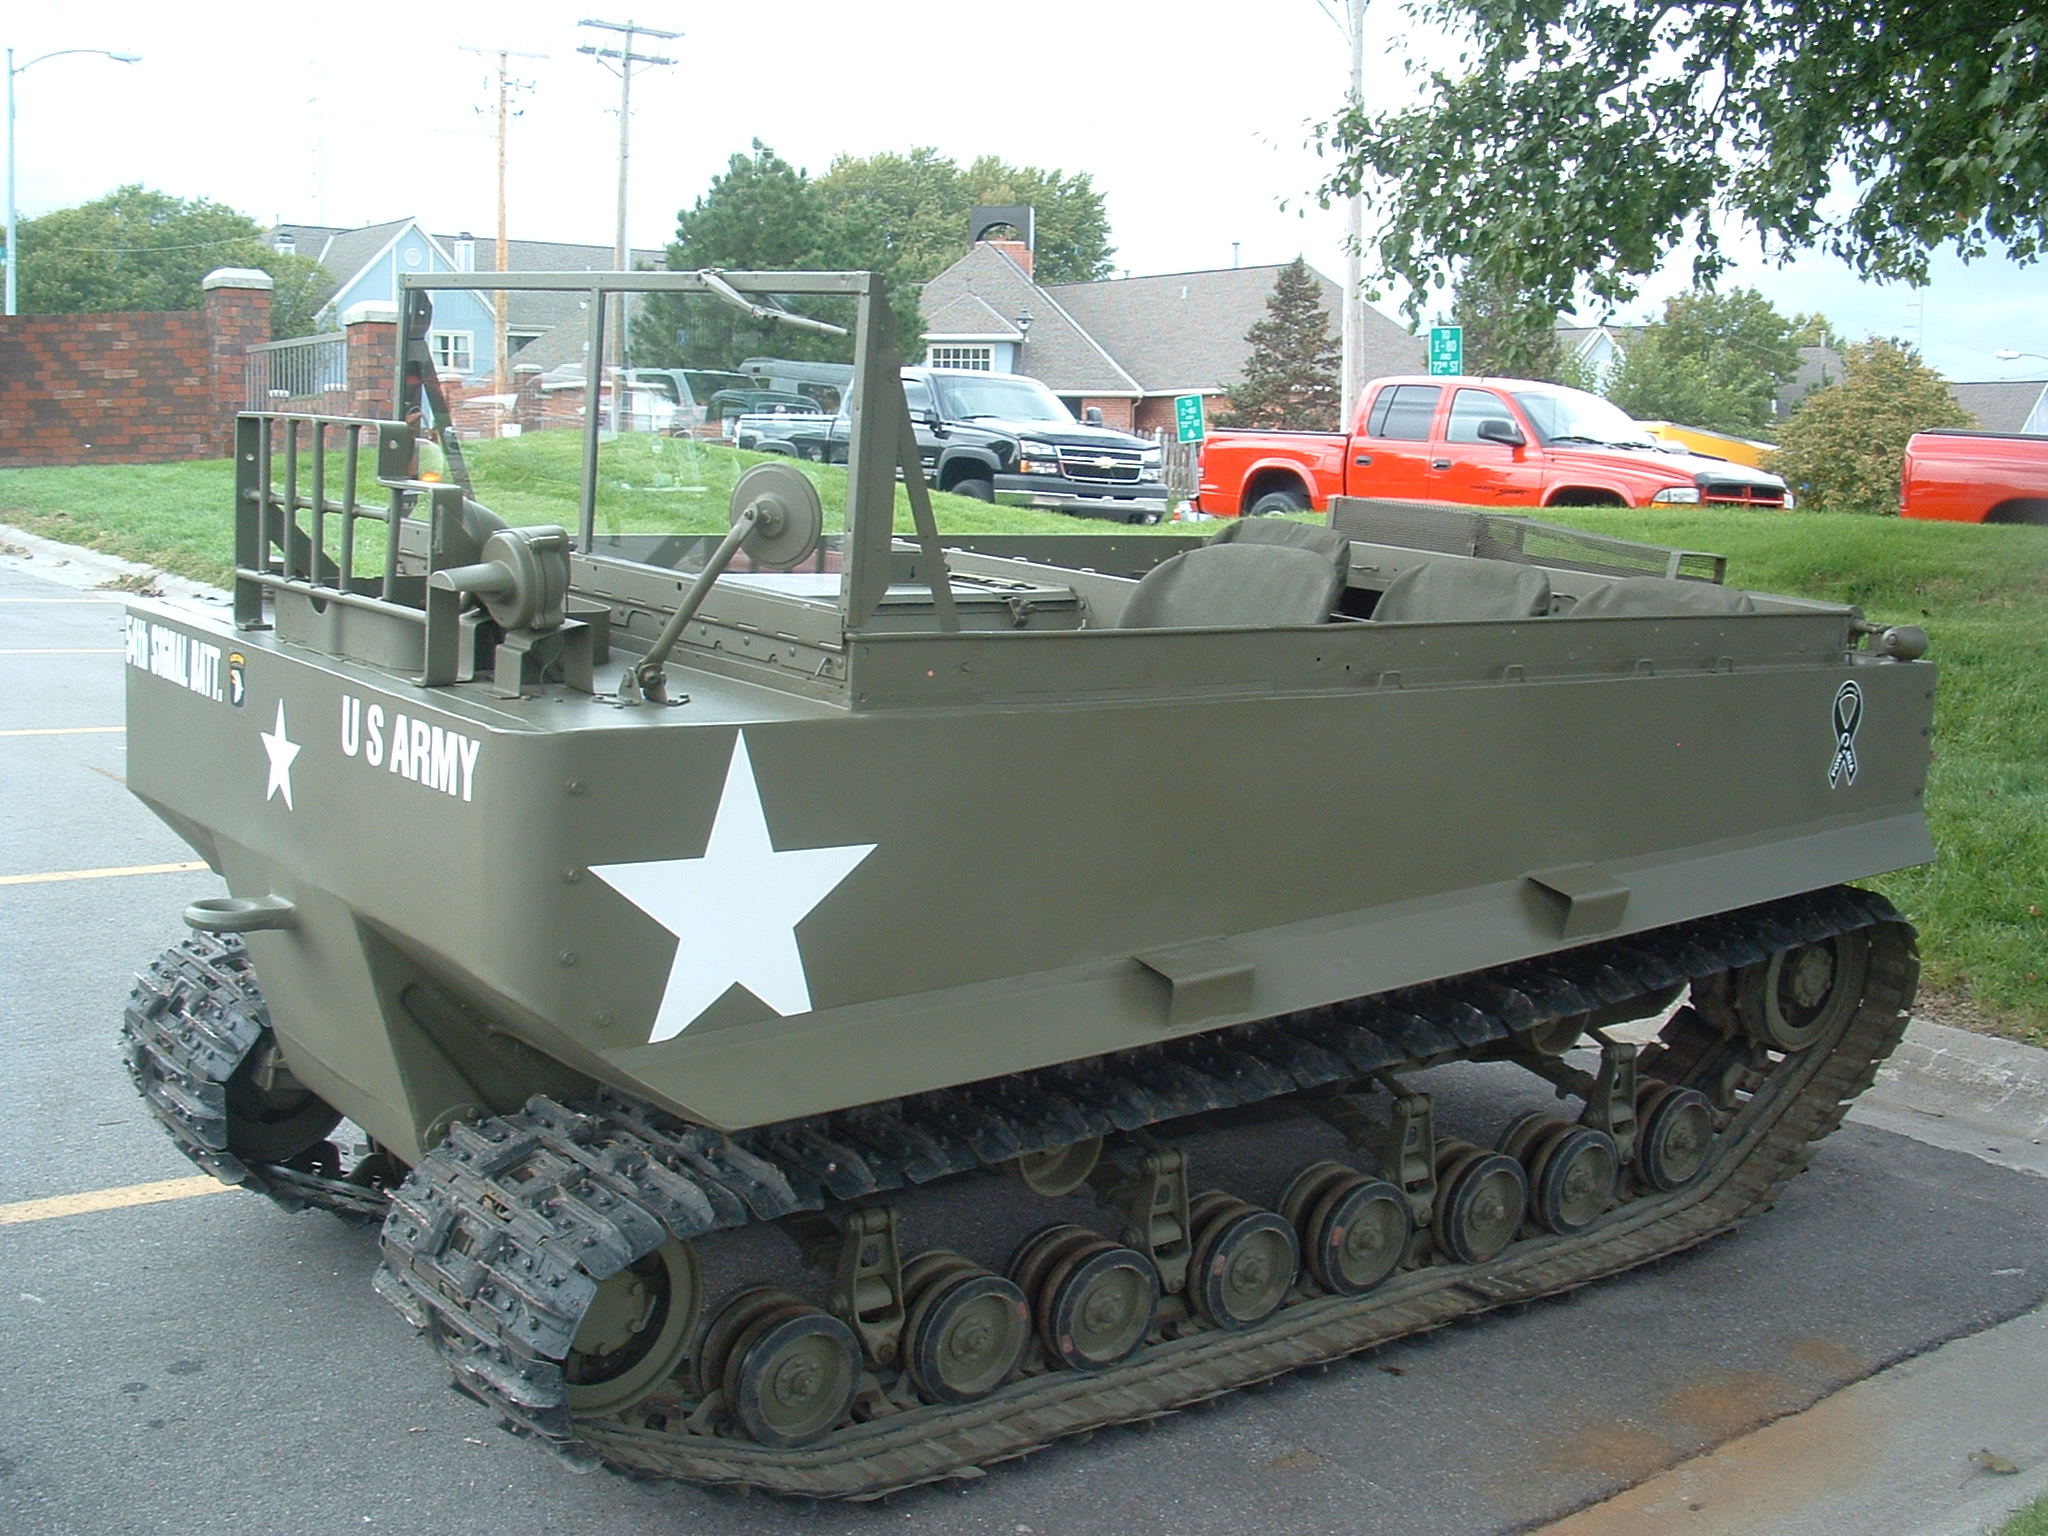 Studebaker M29 Weasel Photo Gallery: Photo #01 out of 12, Image ...